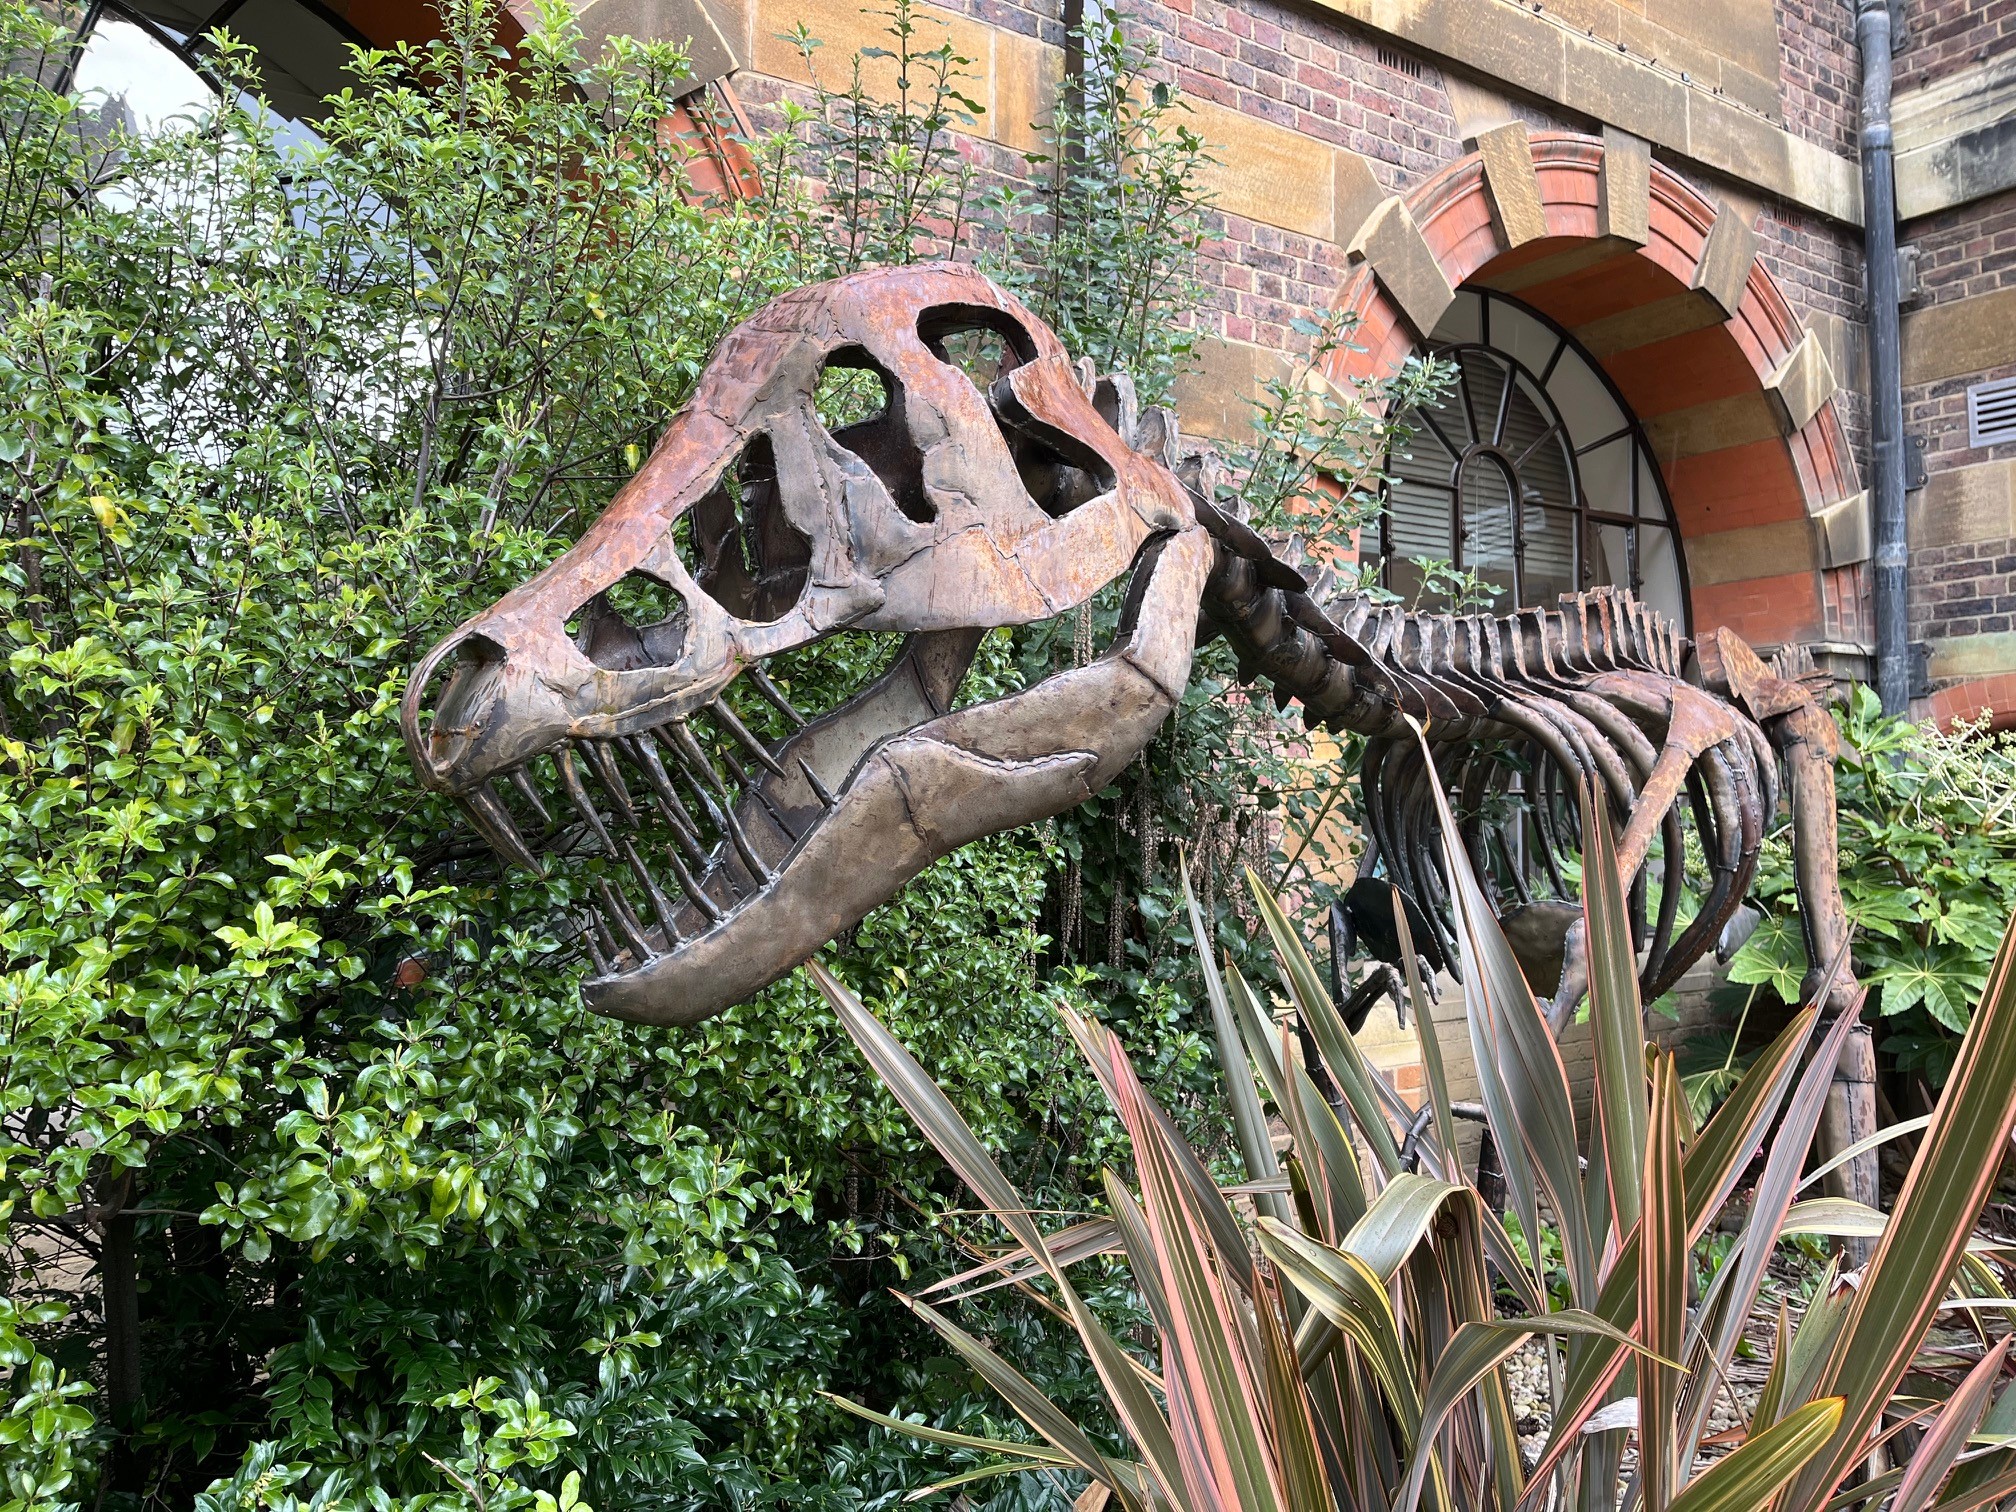 Artist's sculpture of a T. rex skeleton, outside the museum, surrounded by bushes.